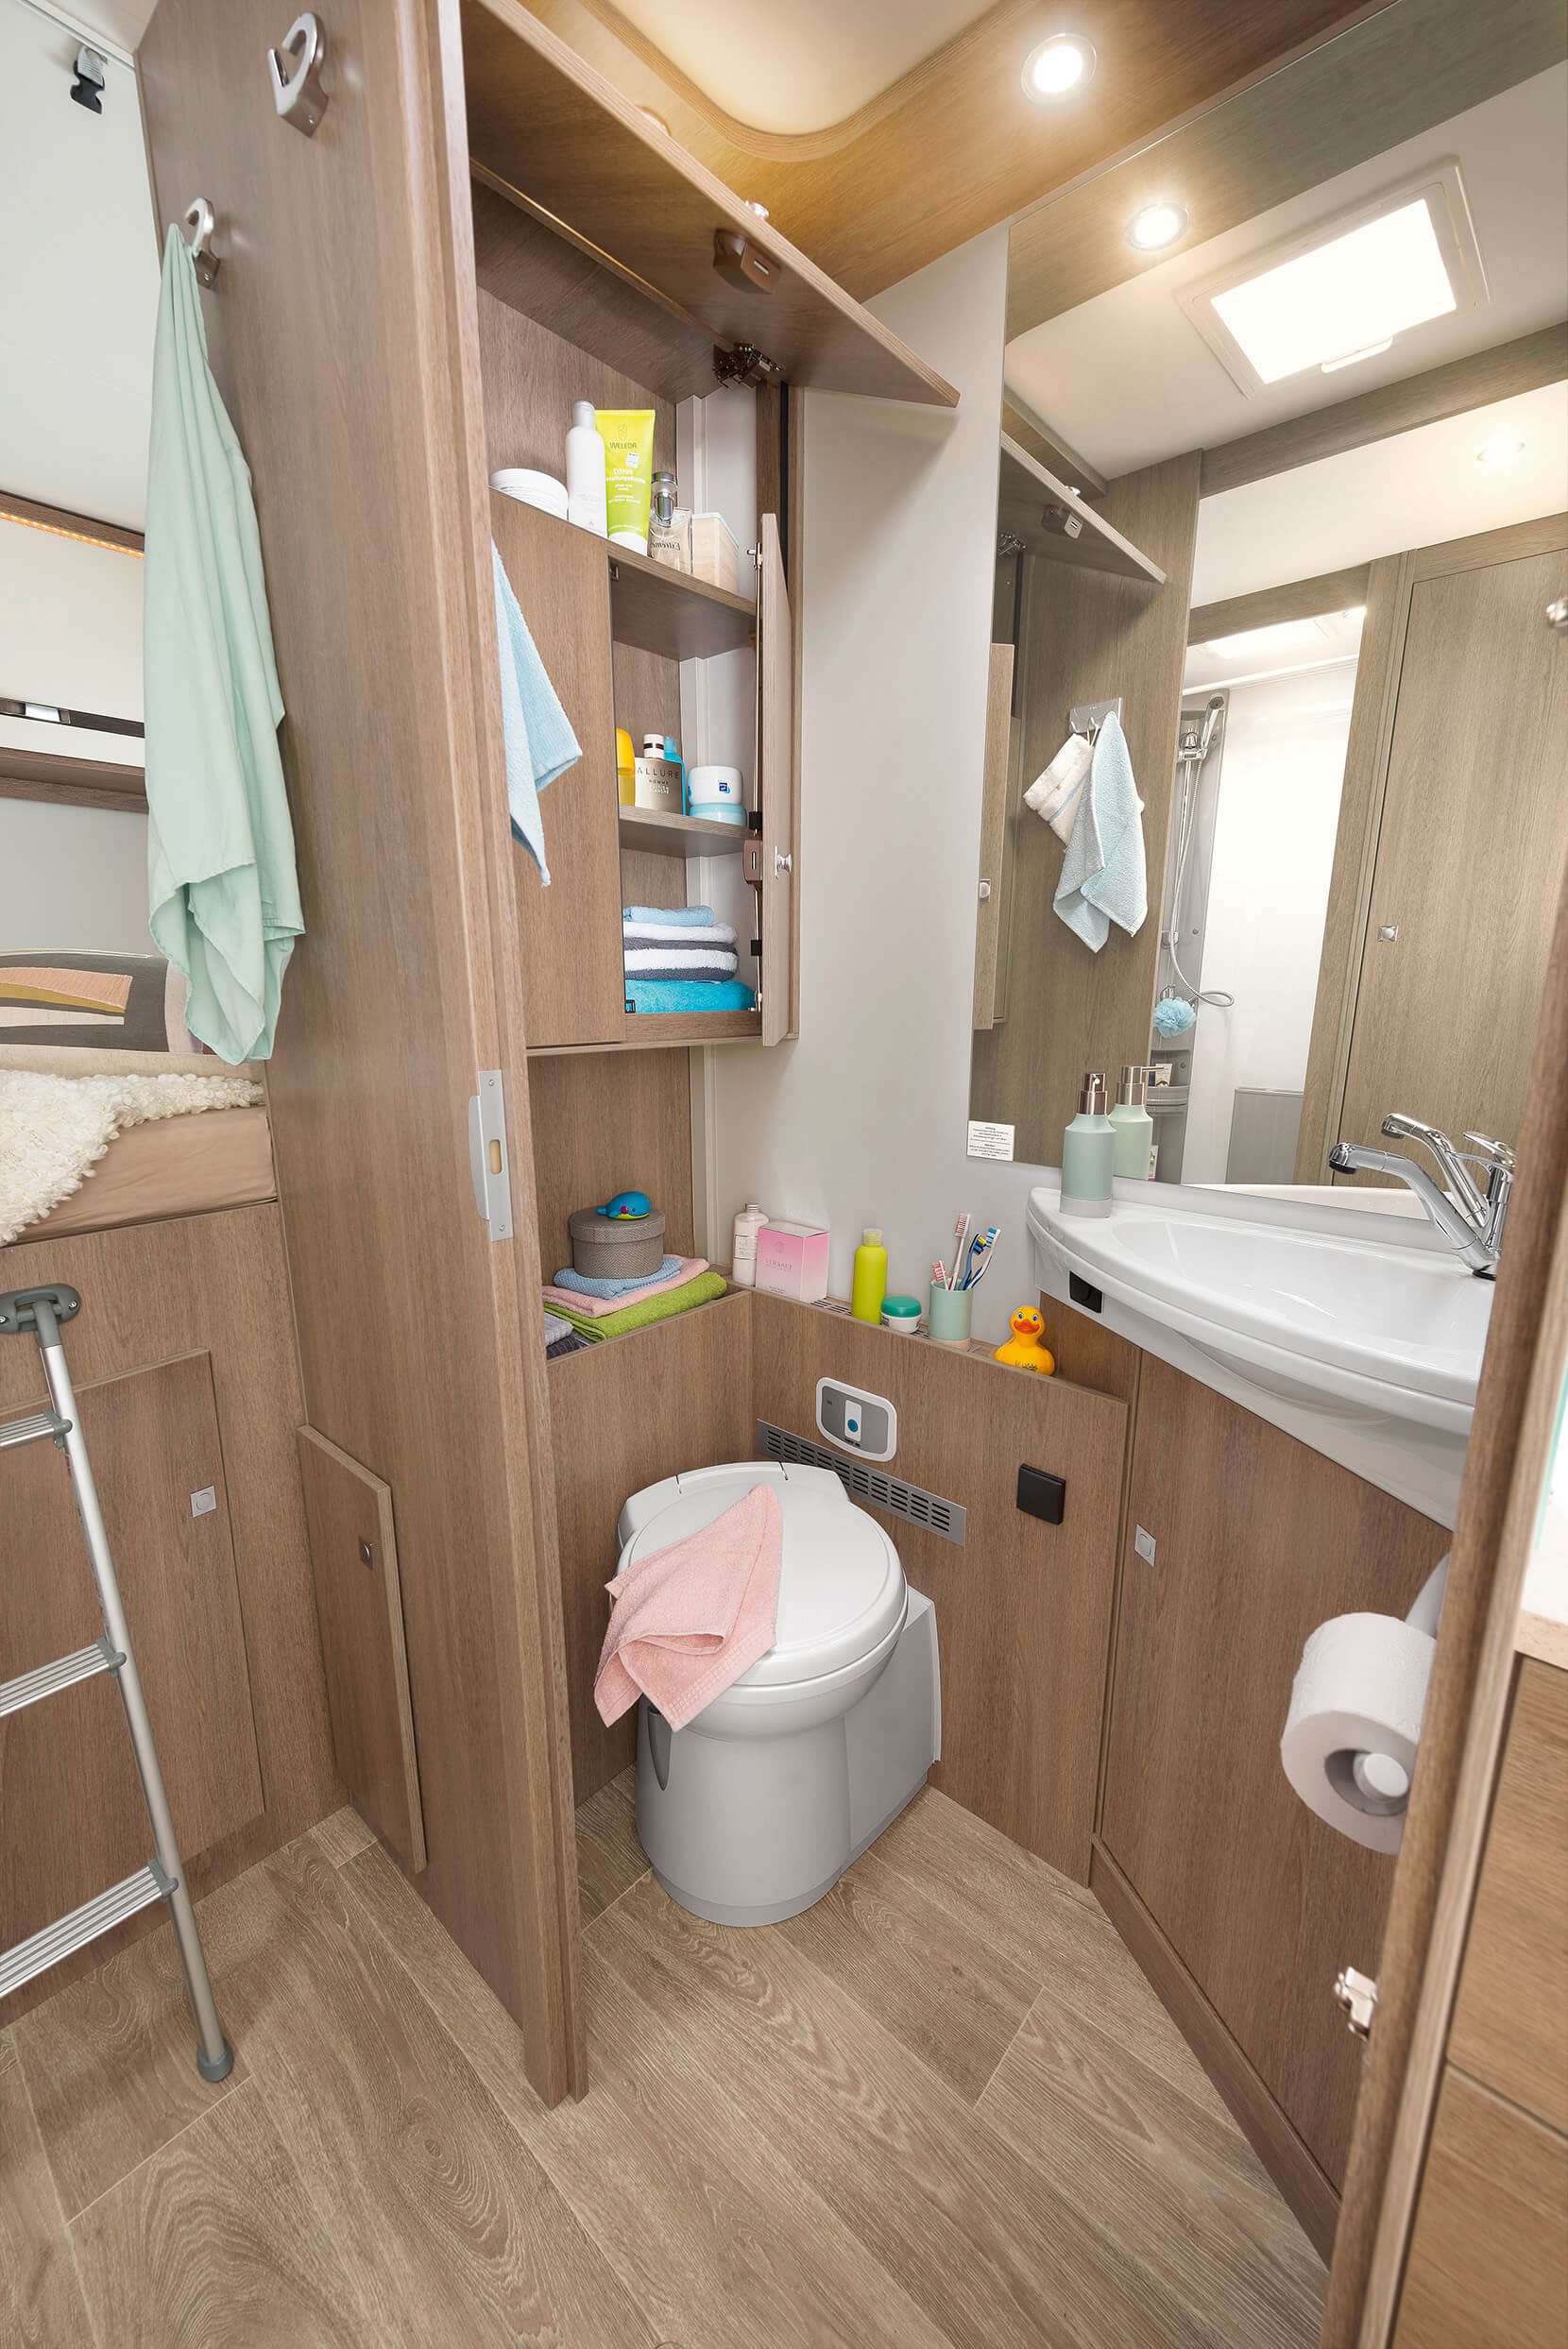 Family-friendly: large bathroom for the whole family with separate shower • A 7877-2